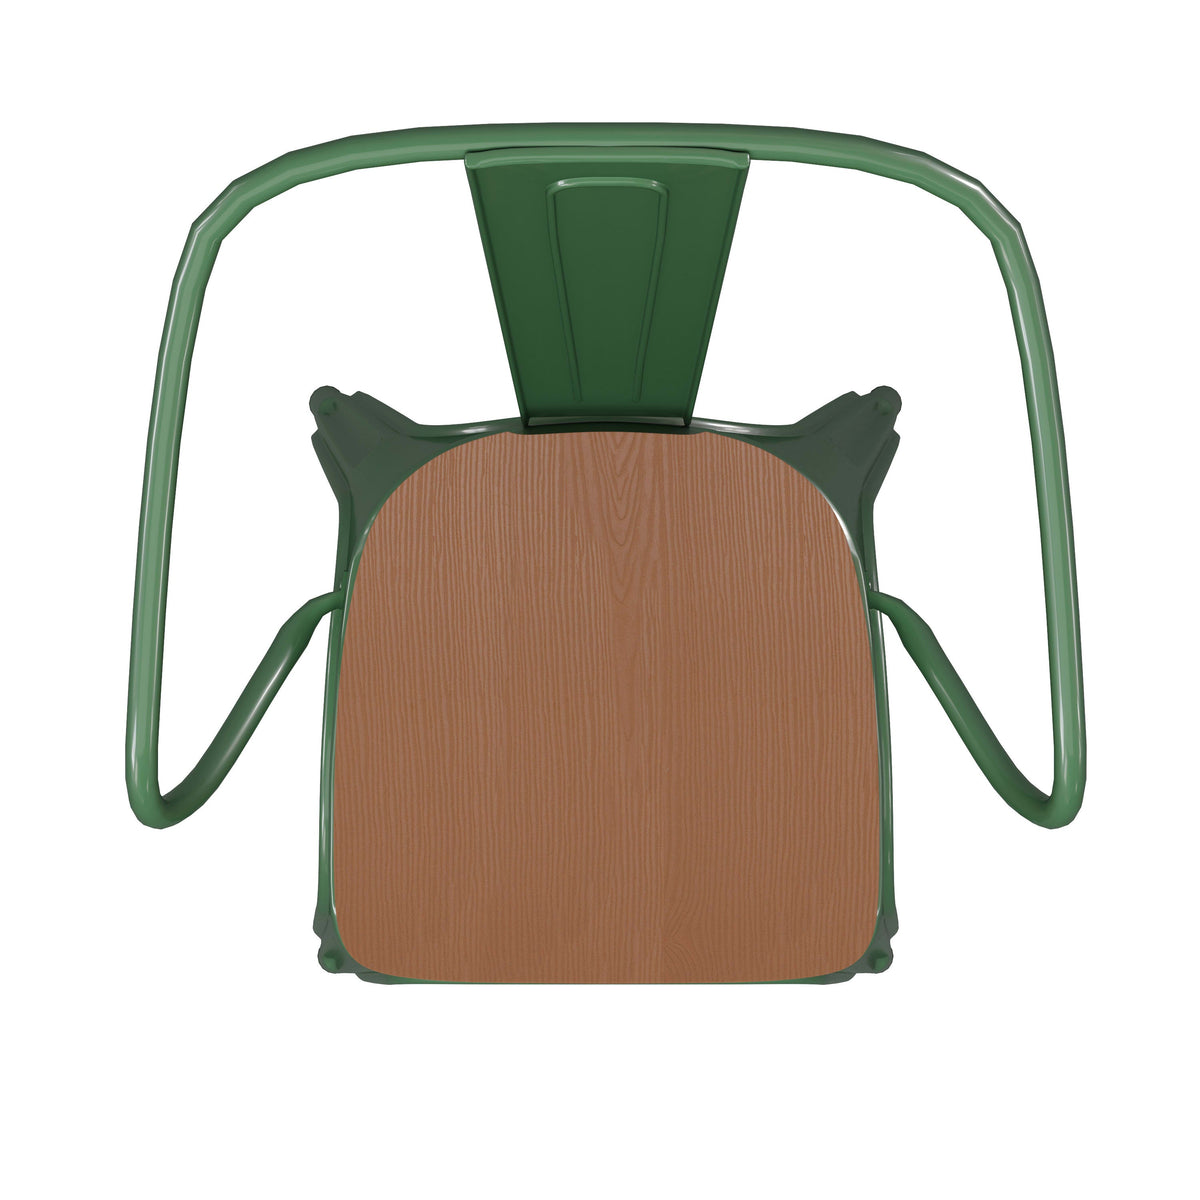 Green/Teak |#| All-Weather Metal Stack Chair with Arms and Poly Resin Seat - Green/Teak